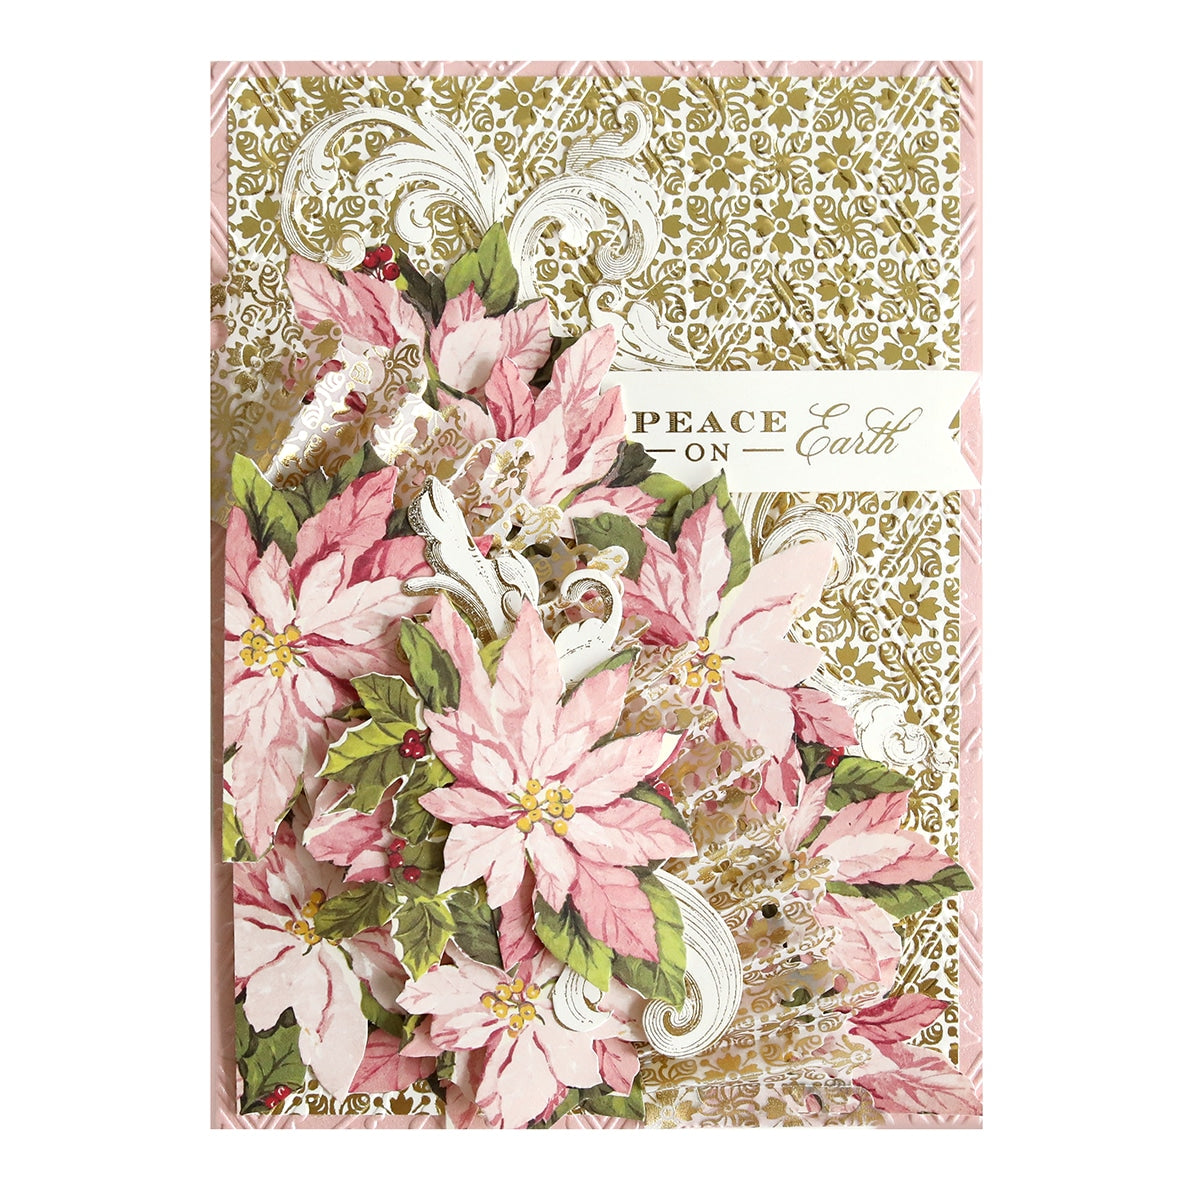 a card with pink flowers on it.